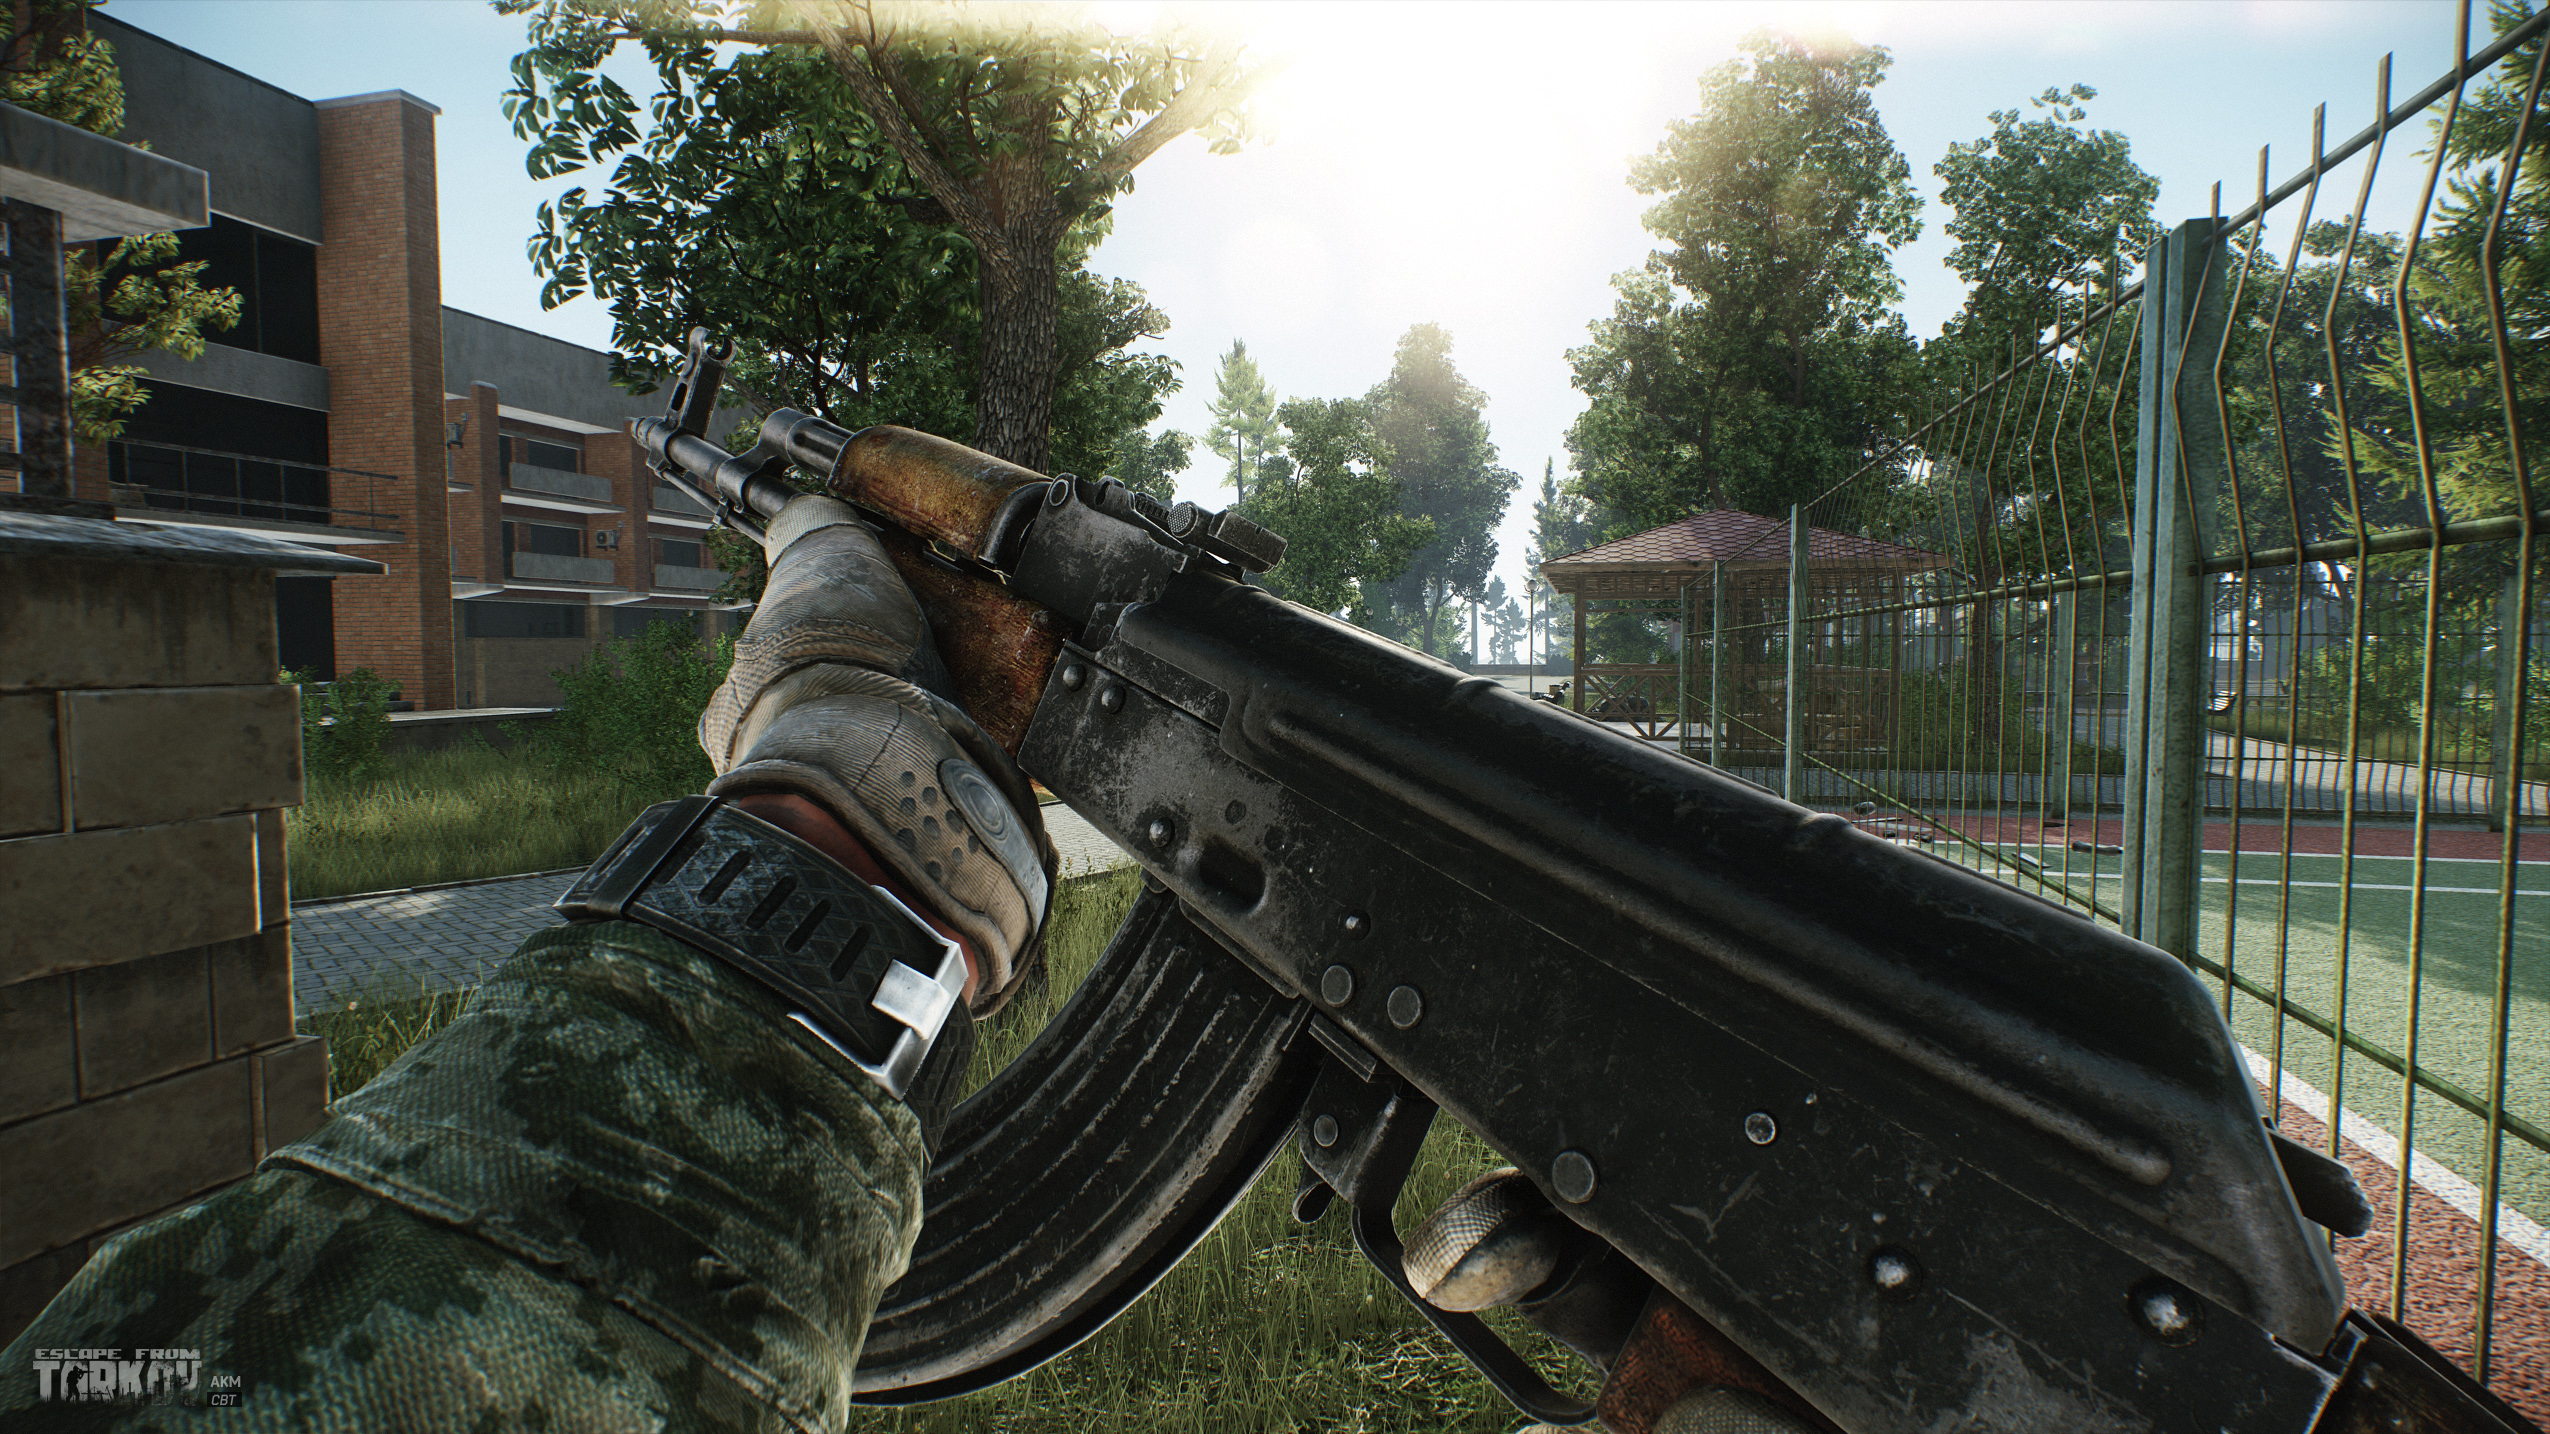 Escape from Tarkov We present to your attention the screenshots of the latest addition to our weapon range - 7.62mm AKM - 4